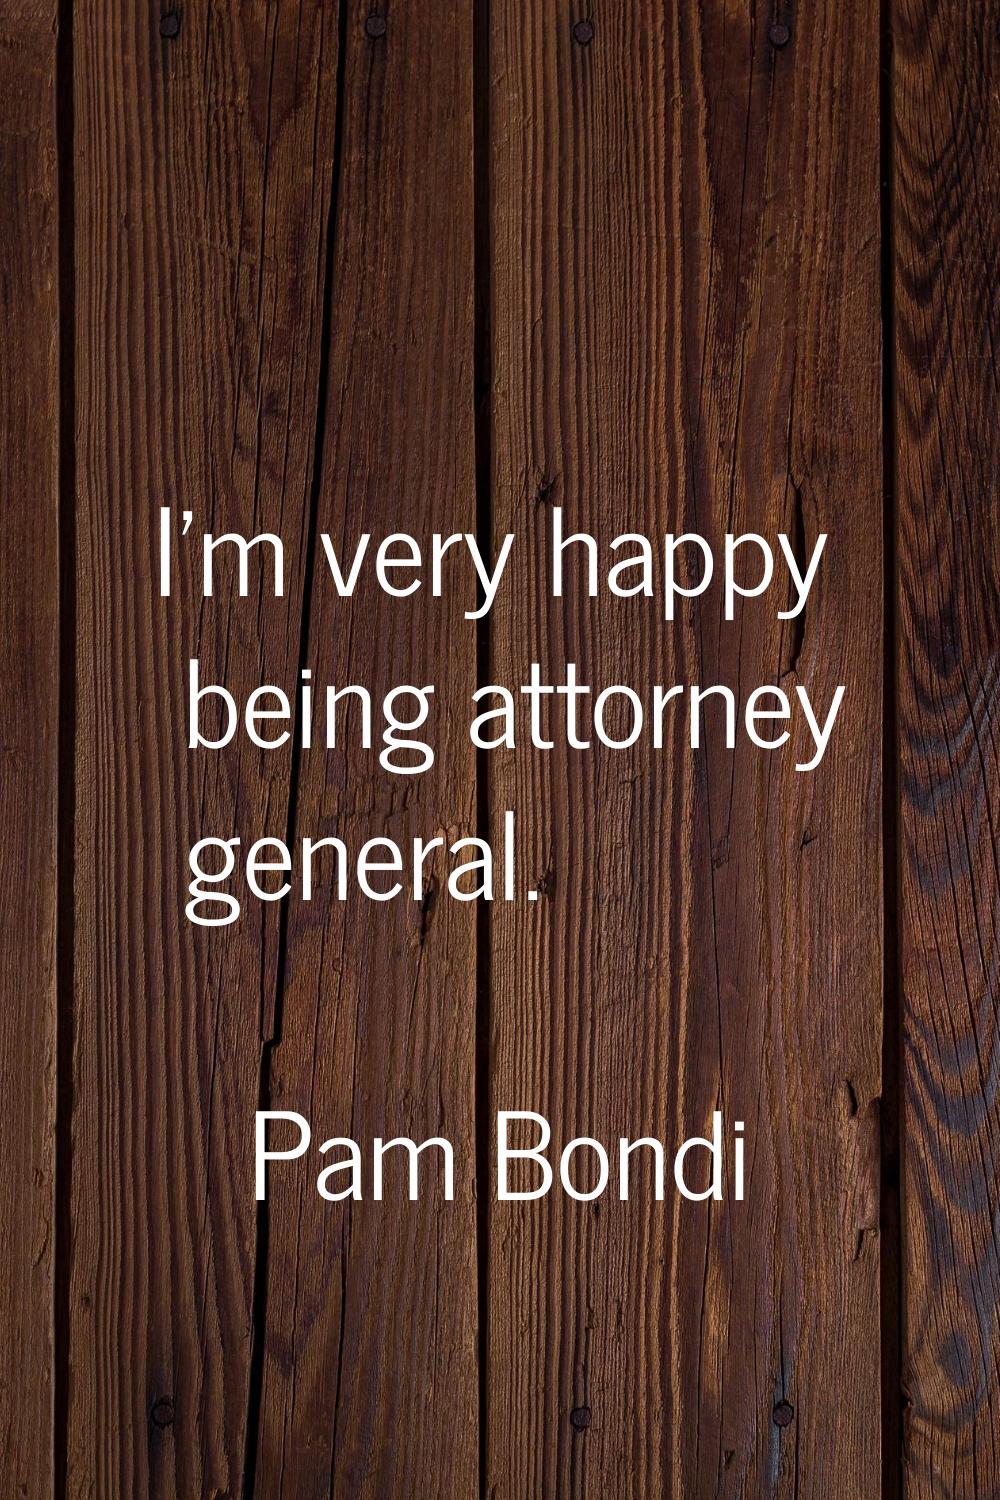 I'm very happy being attorney general.